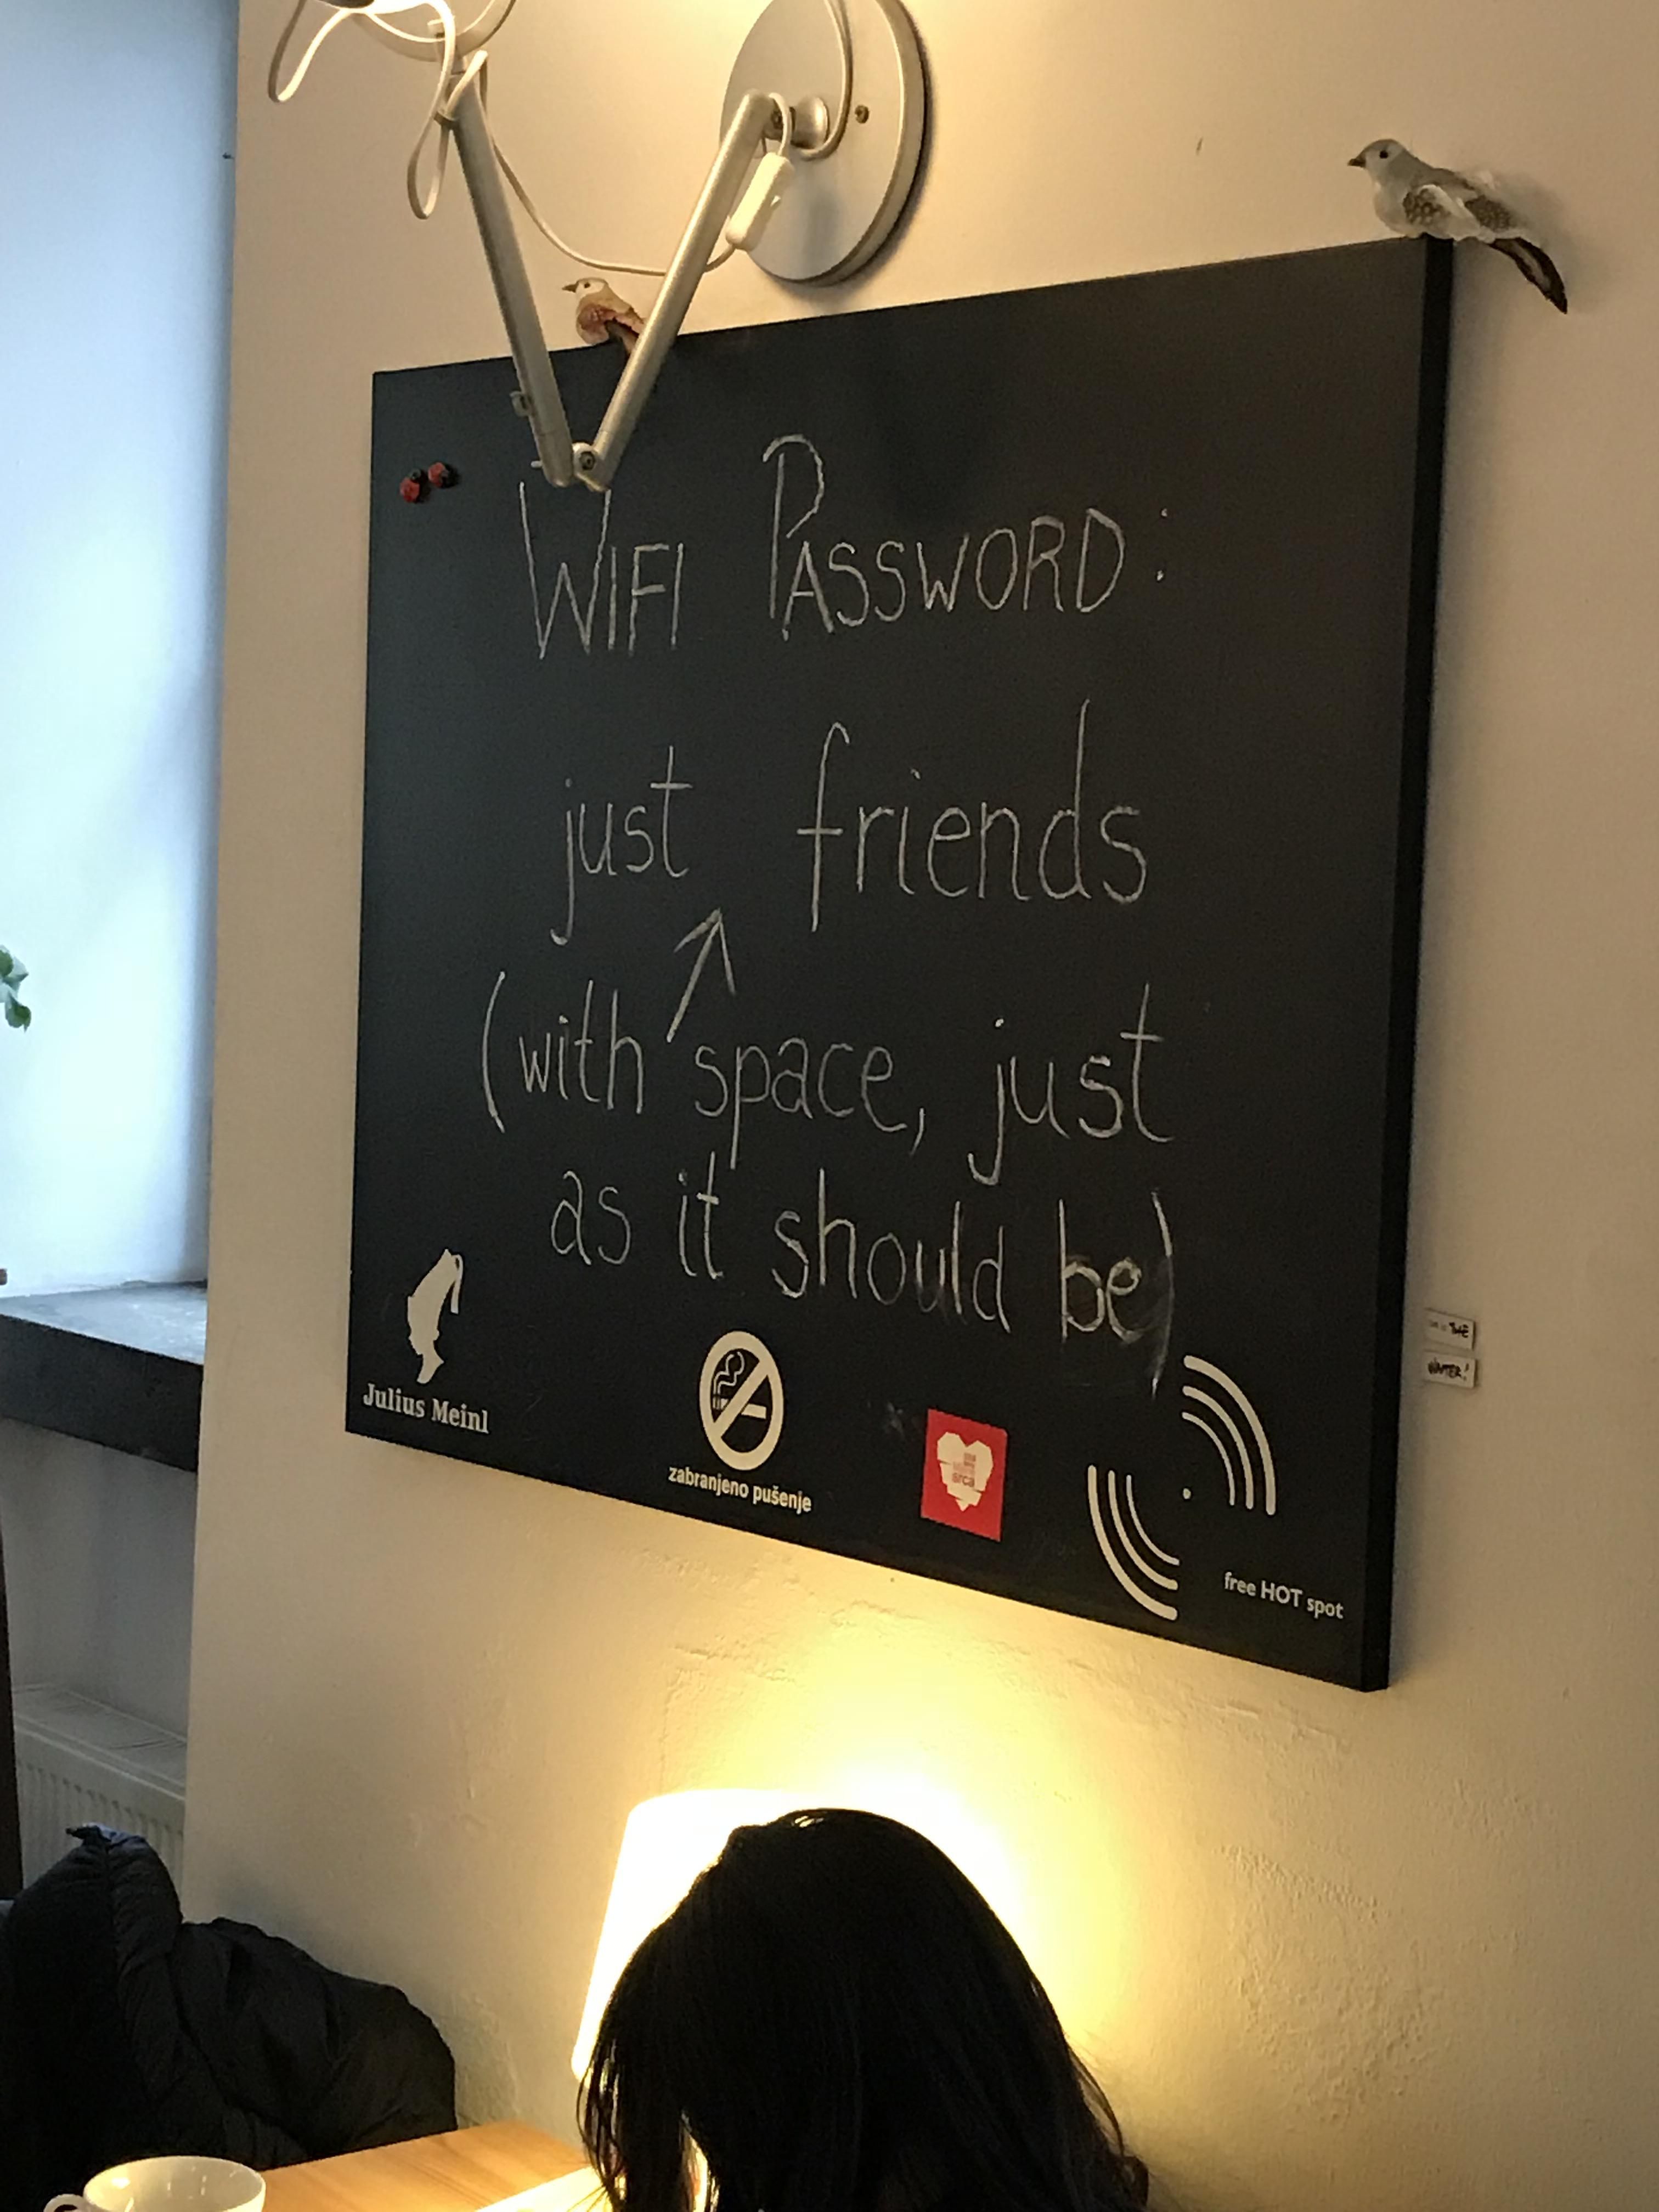 The WiFi password at the Museum of Broken Relationships in Zagreb, Croatia.